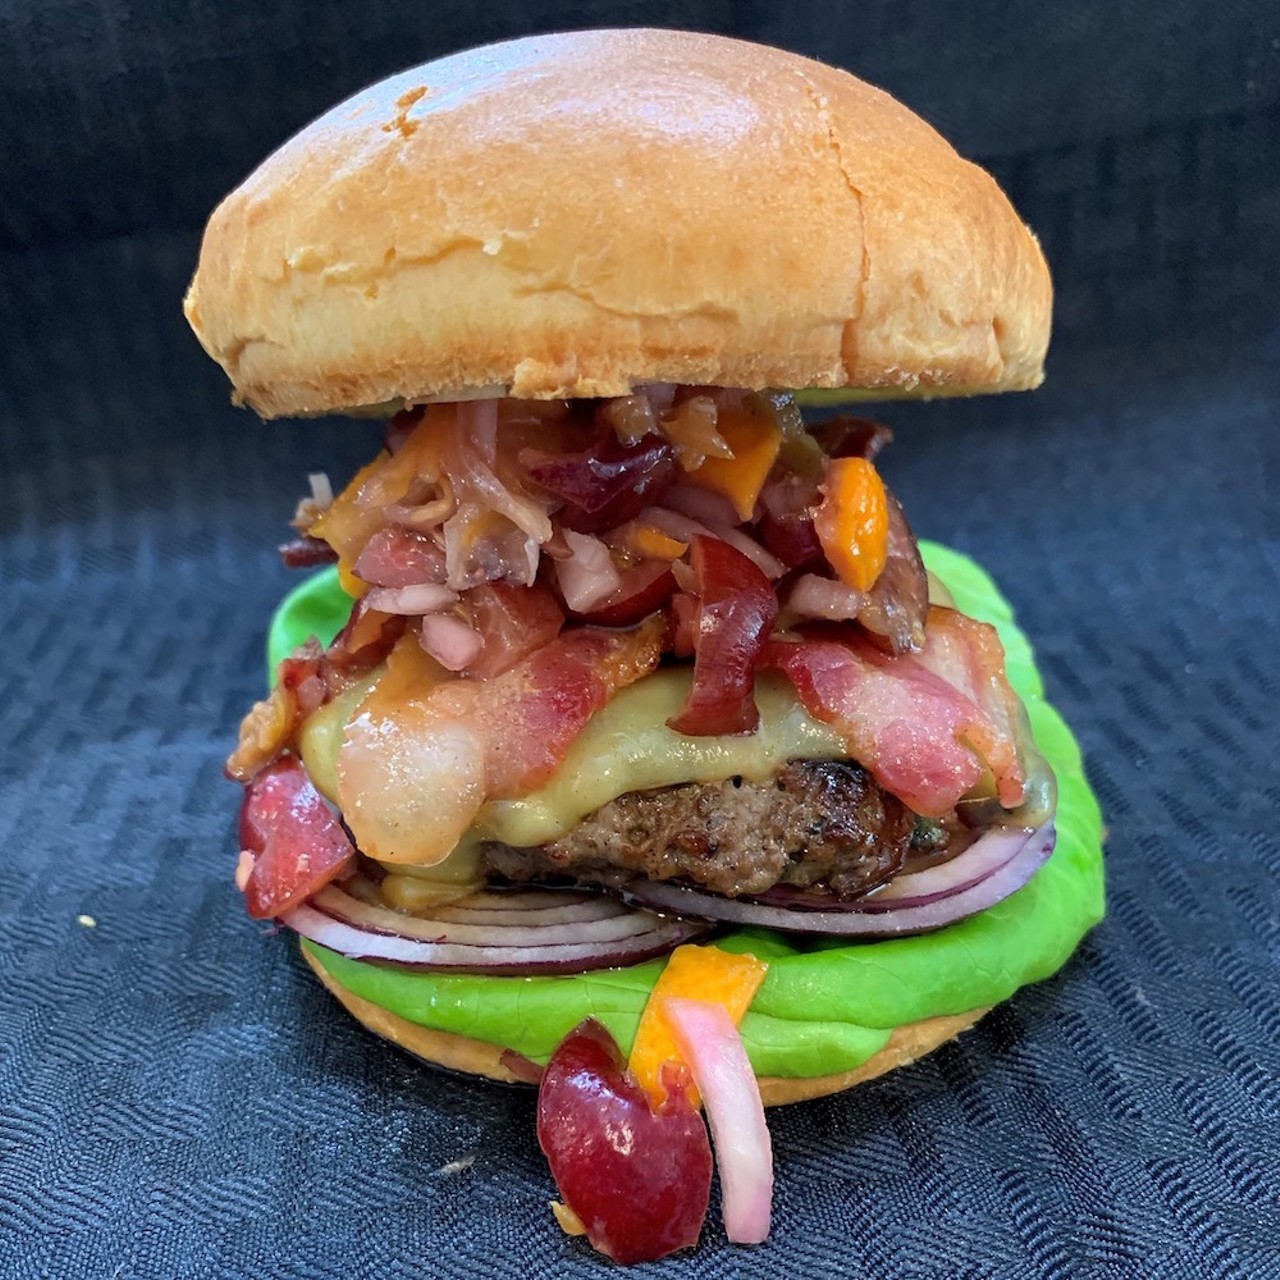 Black Cherry Burger
Carousel Foods uses cherries, basil, shallots and garlic to construct one big patty stacked with two slices of bacon, Gouda and cherry-orange relish on a toasted brioche bun.